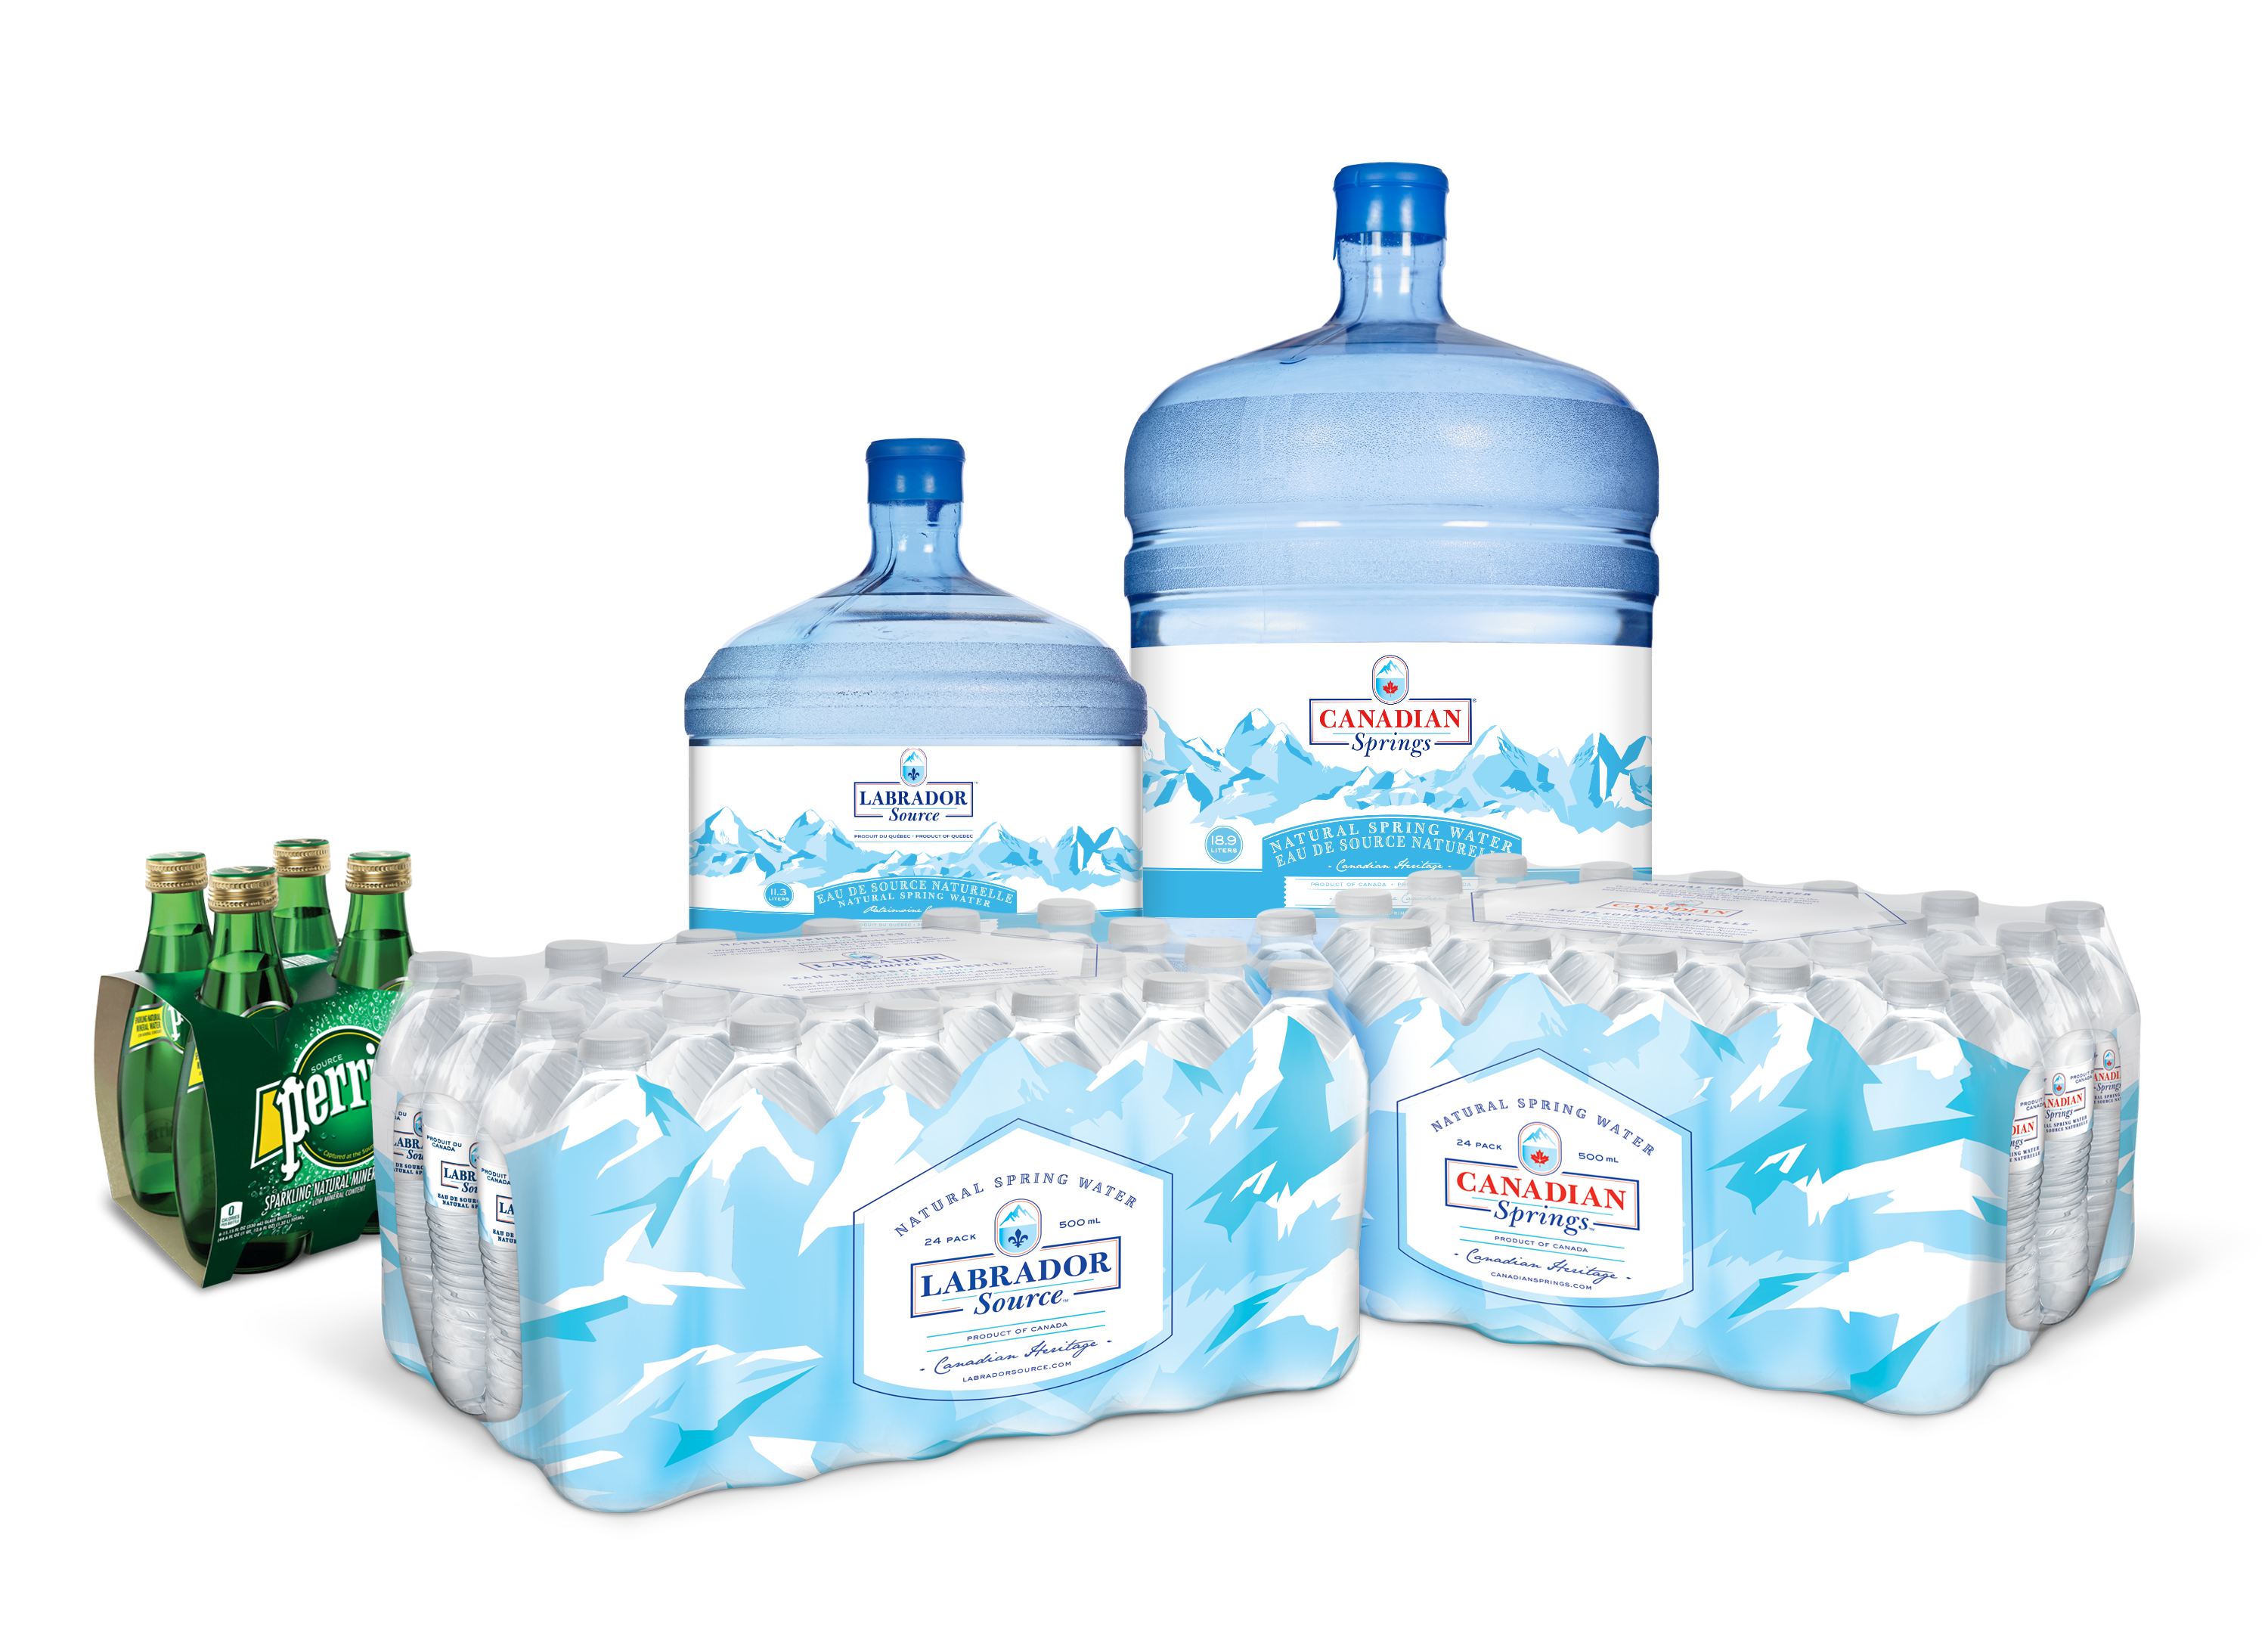 Bottled water products